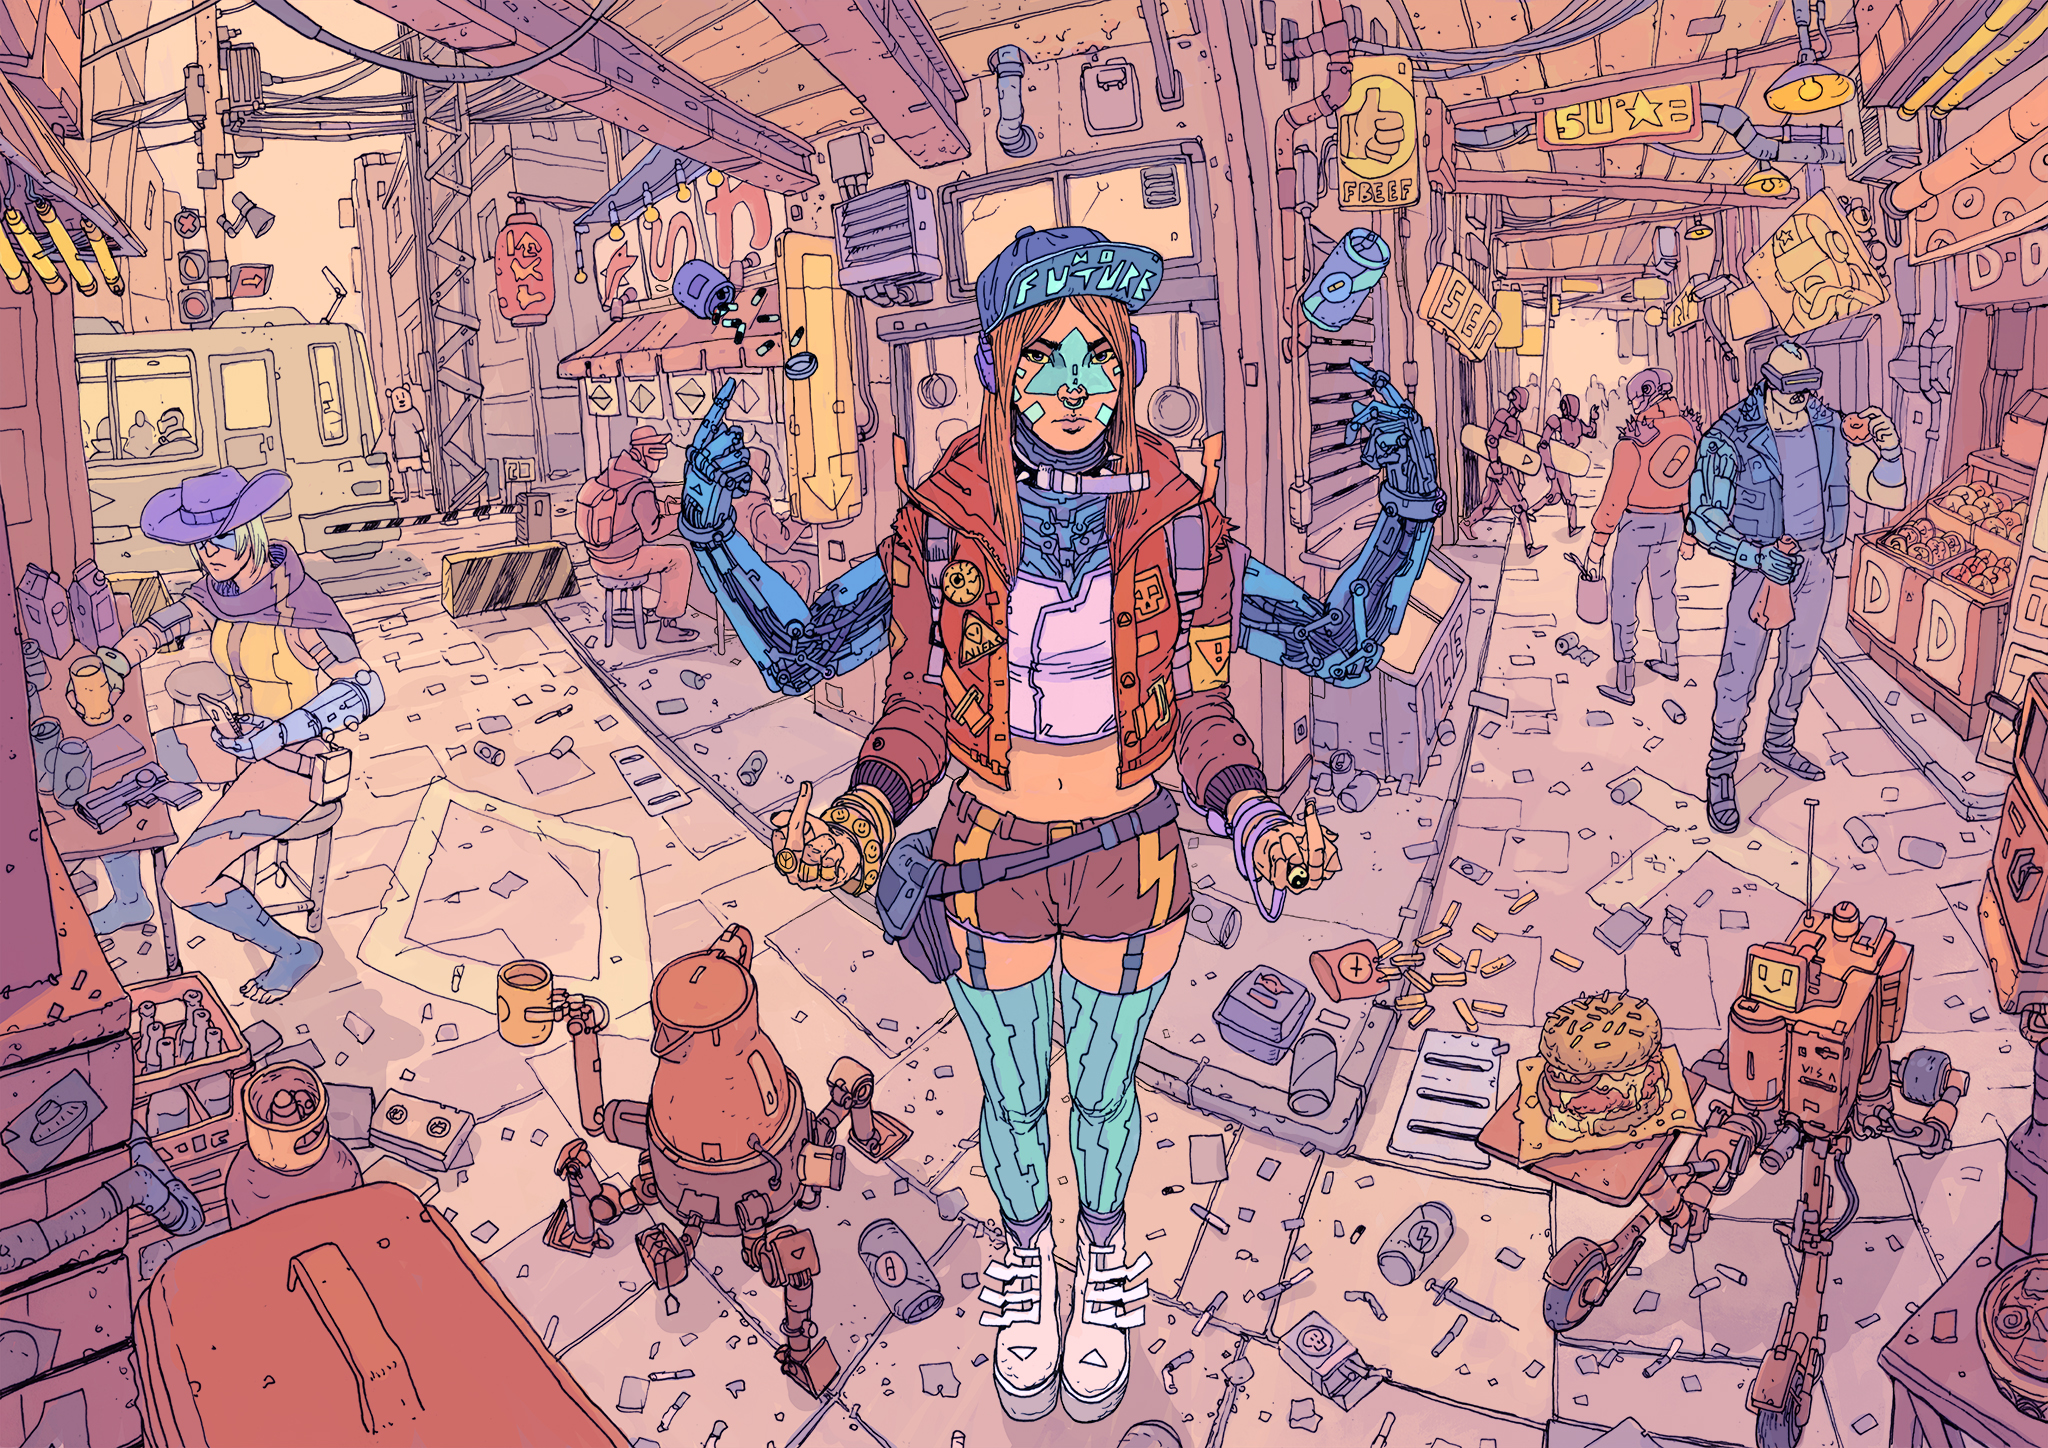 Awesome Cyberpunk Art? Don’t Mind If We Do.